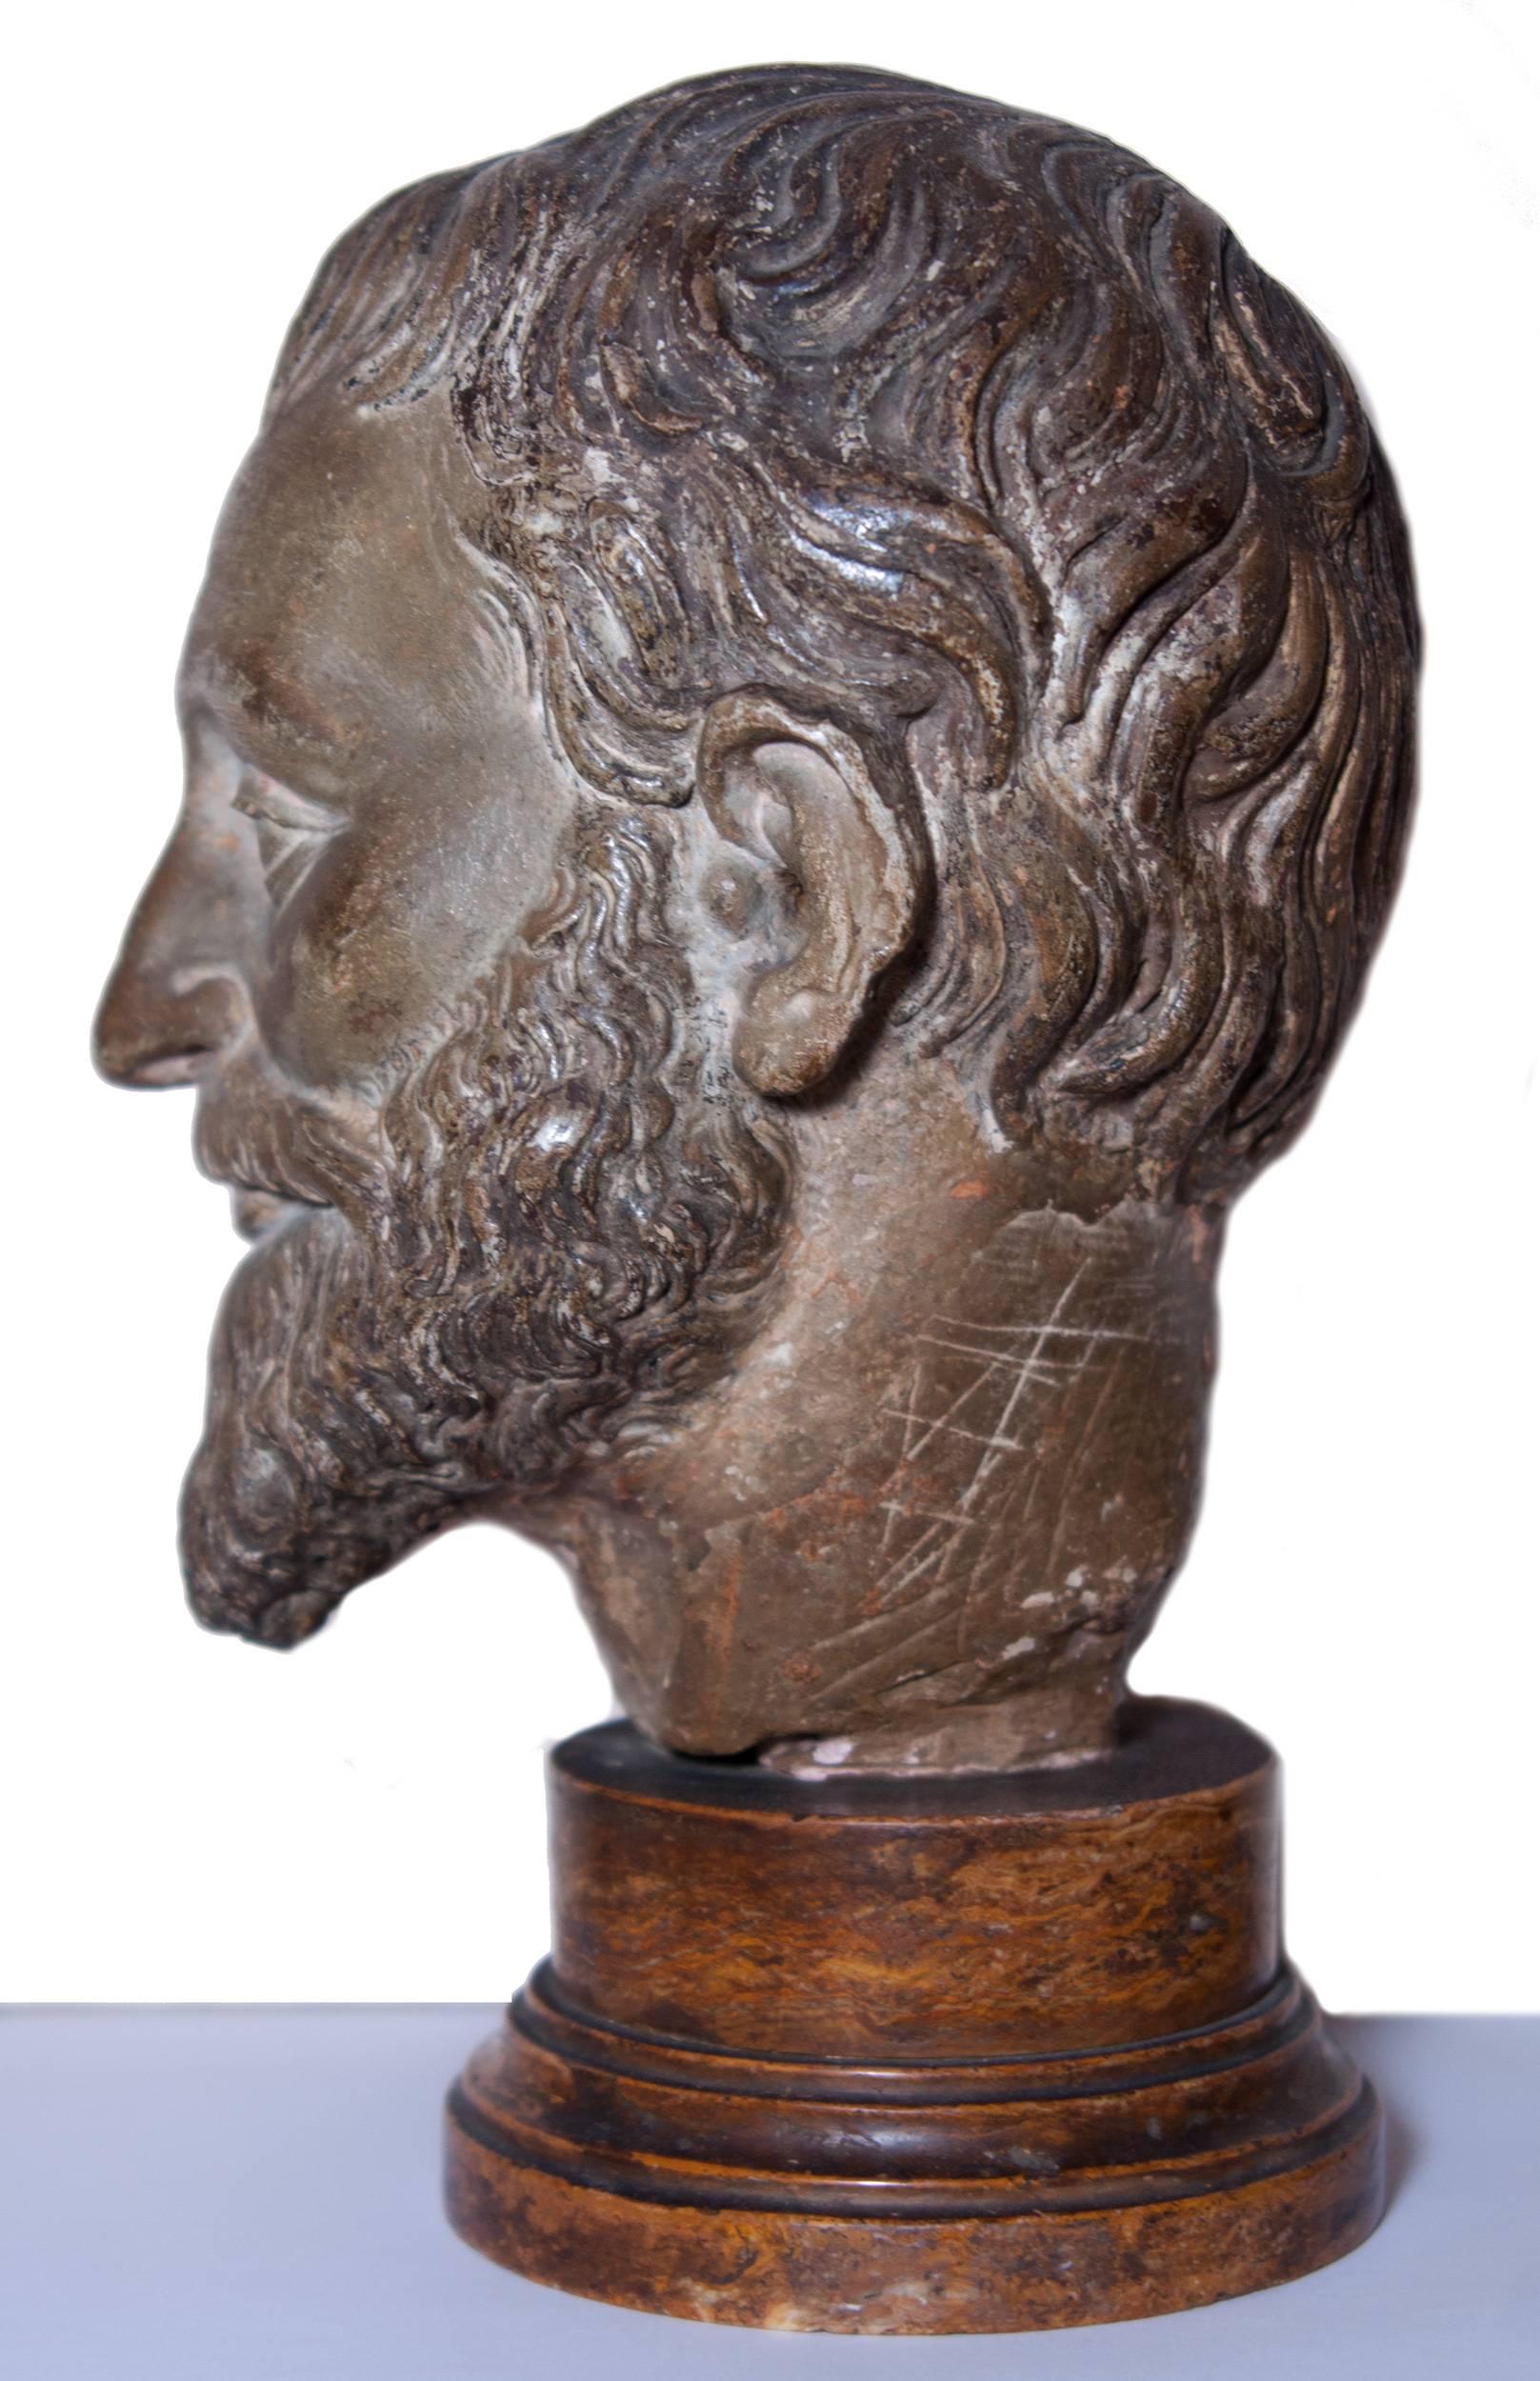 Terracotta head of a bearded man, French school circa 1550-1600 - Renaissance Sculpture by Unknown